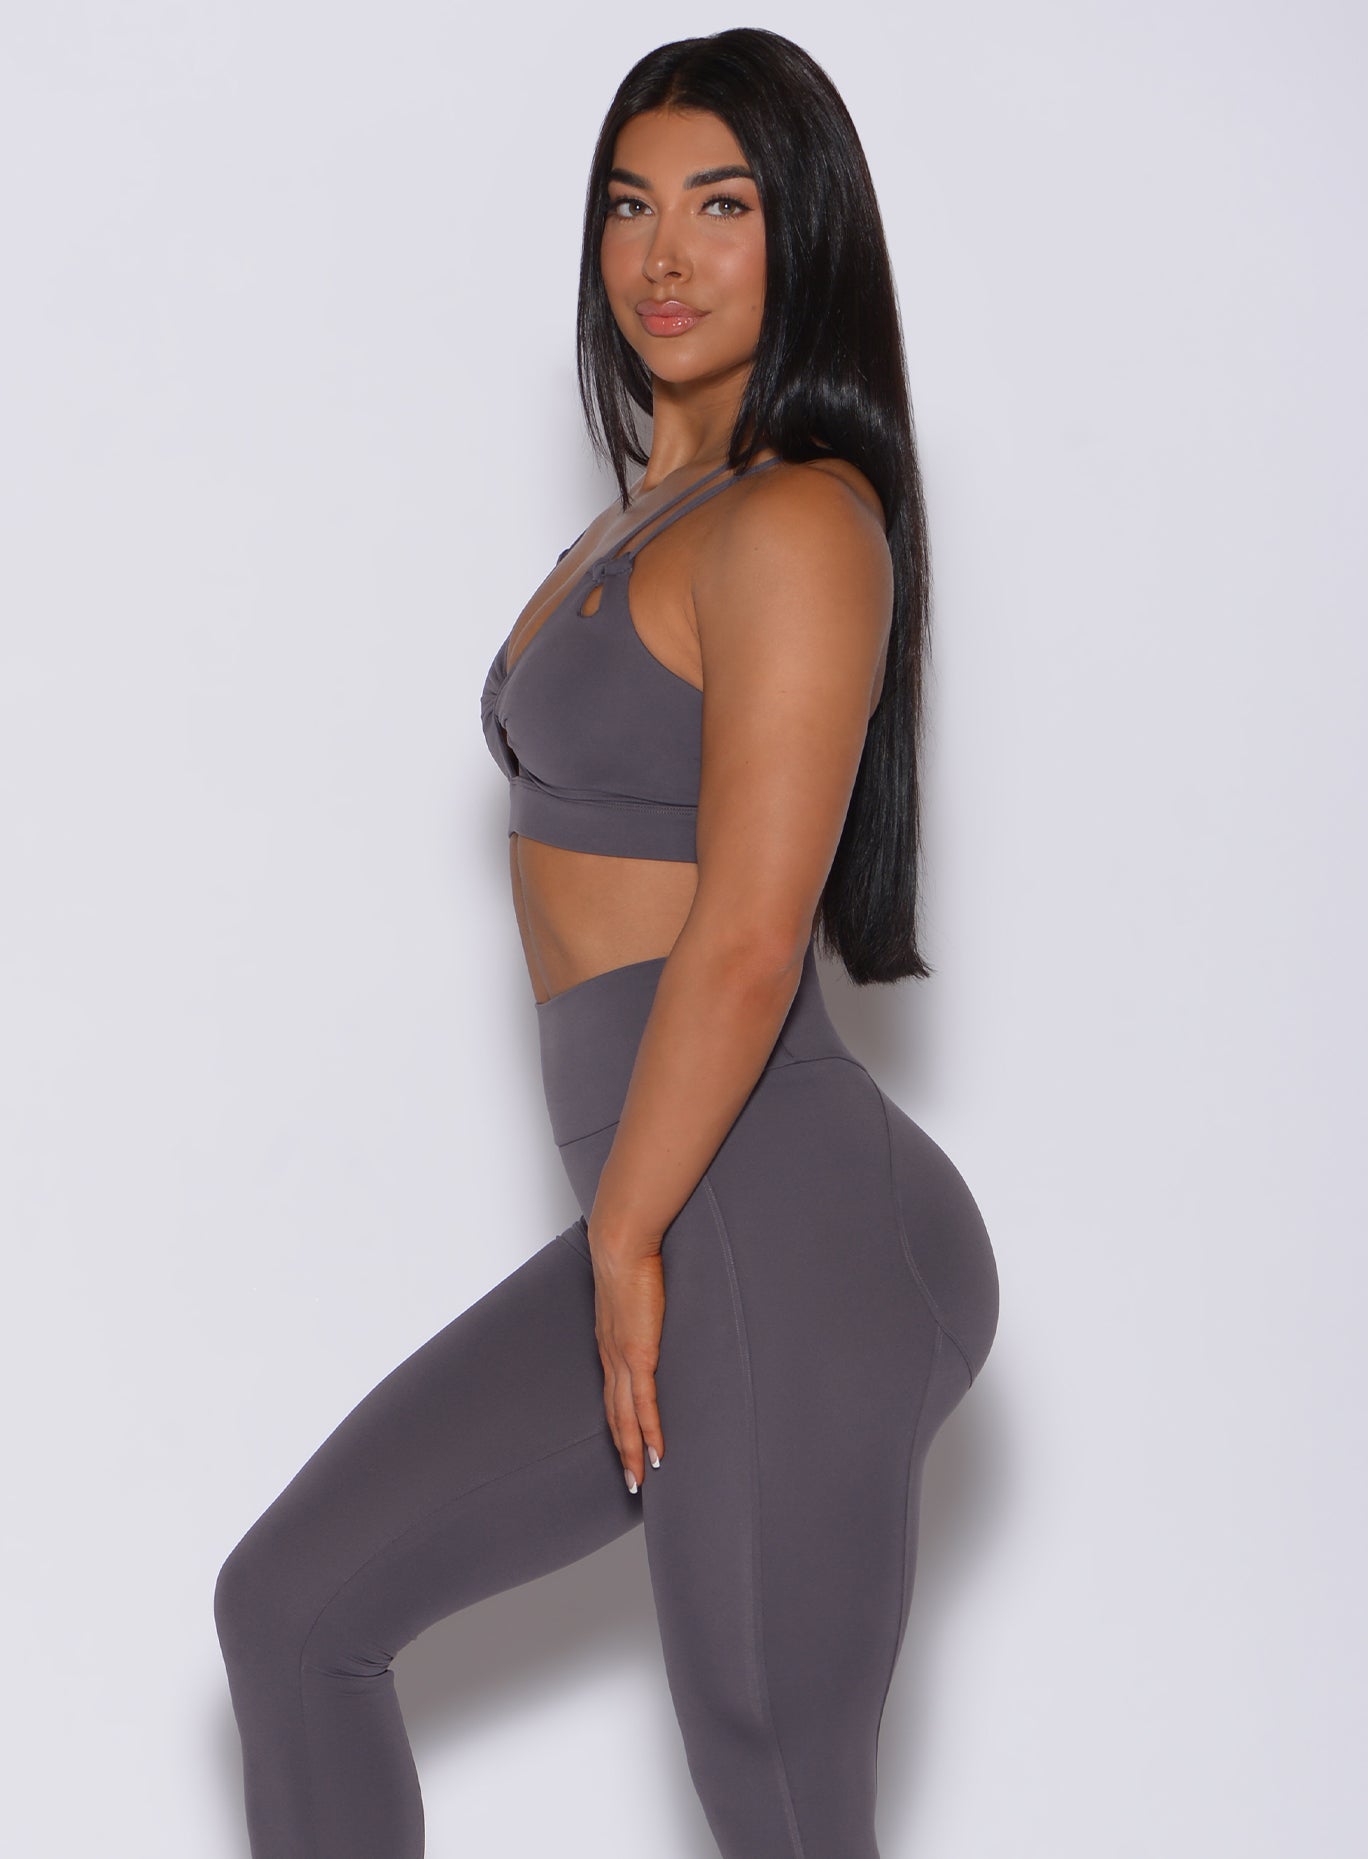 Left side profile view of a model facing to her left wearing our twist sports bra in gray smoke color and a matching leggings